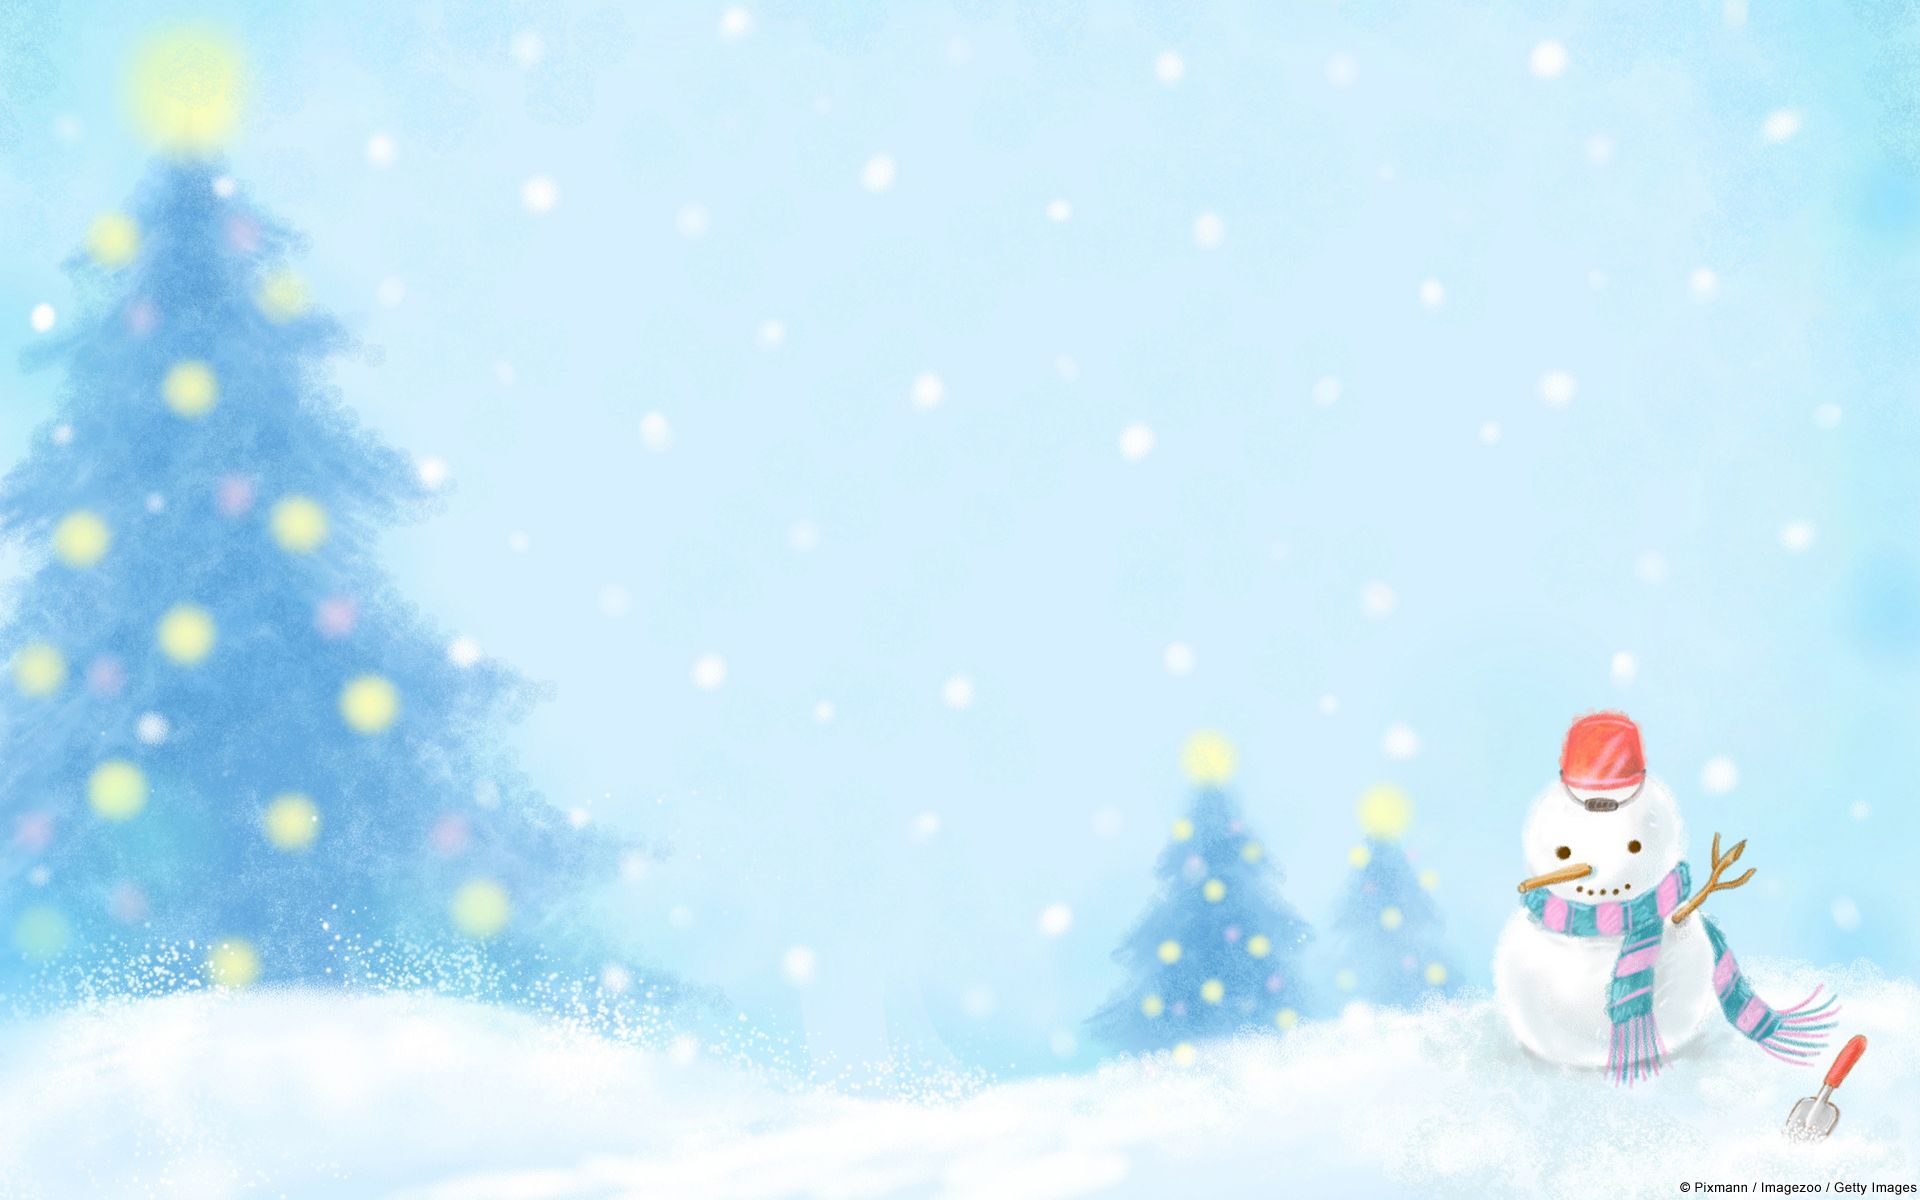 seasons live wallpaper,winter,snow,snowman,sky,playing in the snow